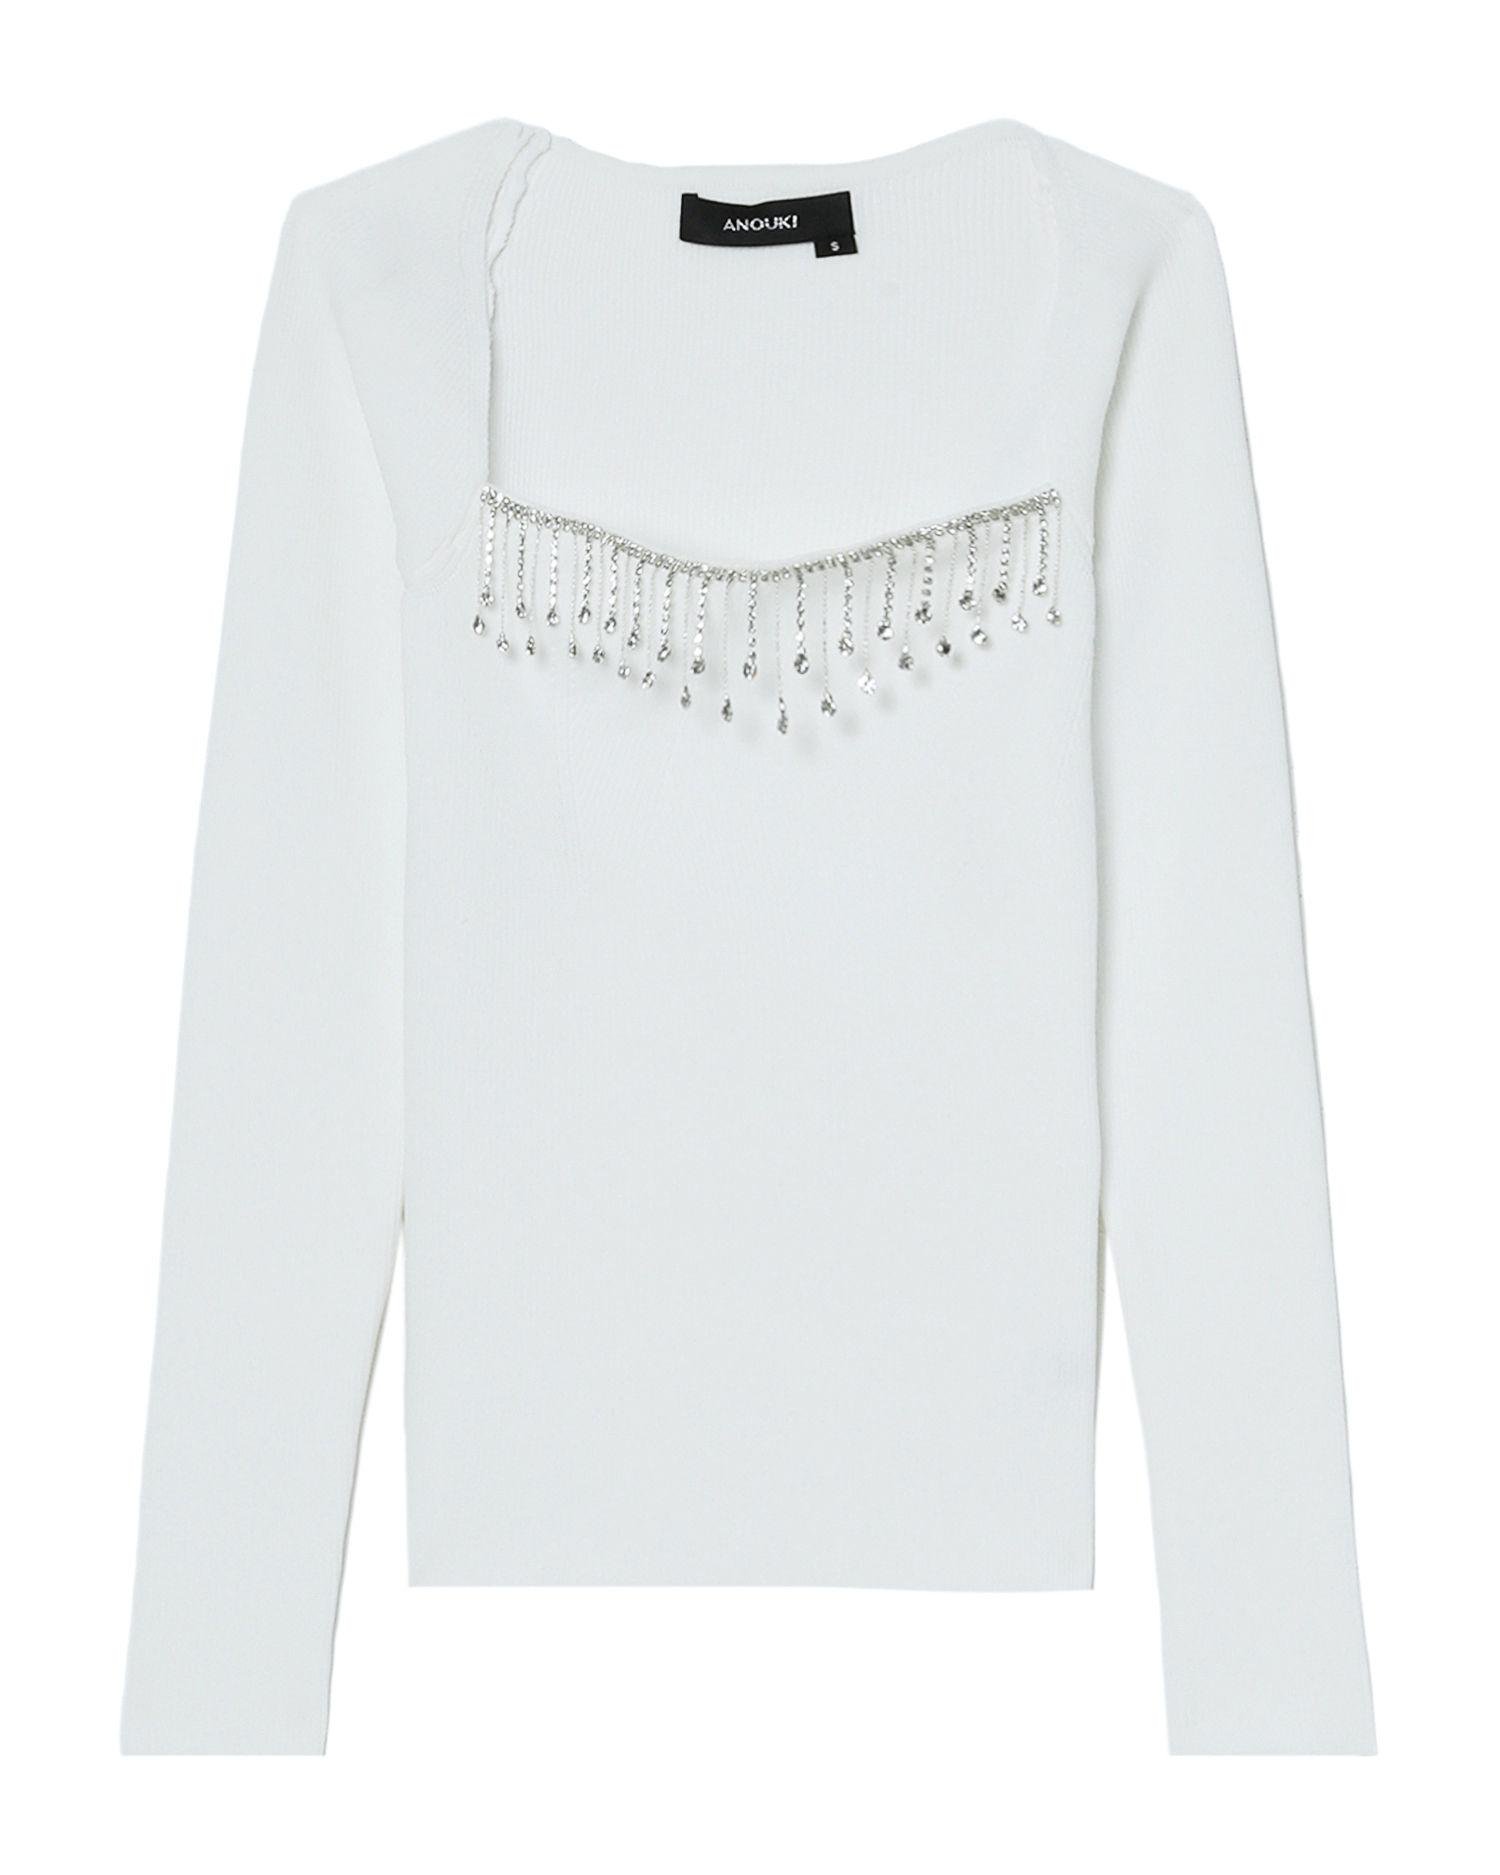 Crystal-embellished long-sleeve top by ANOUKI